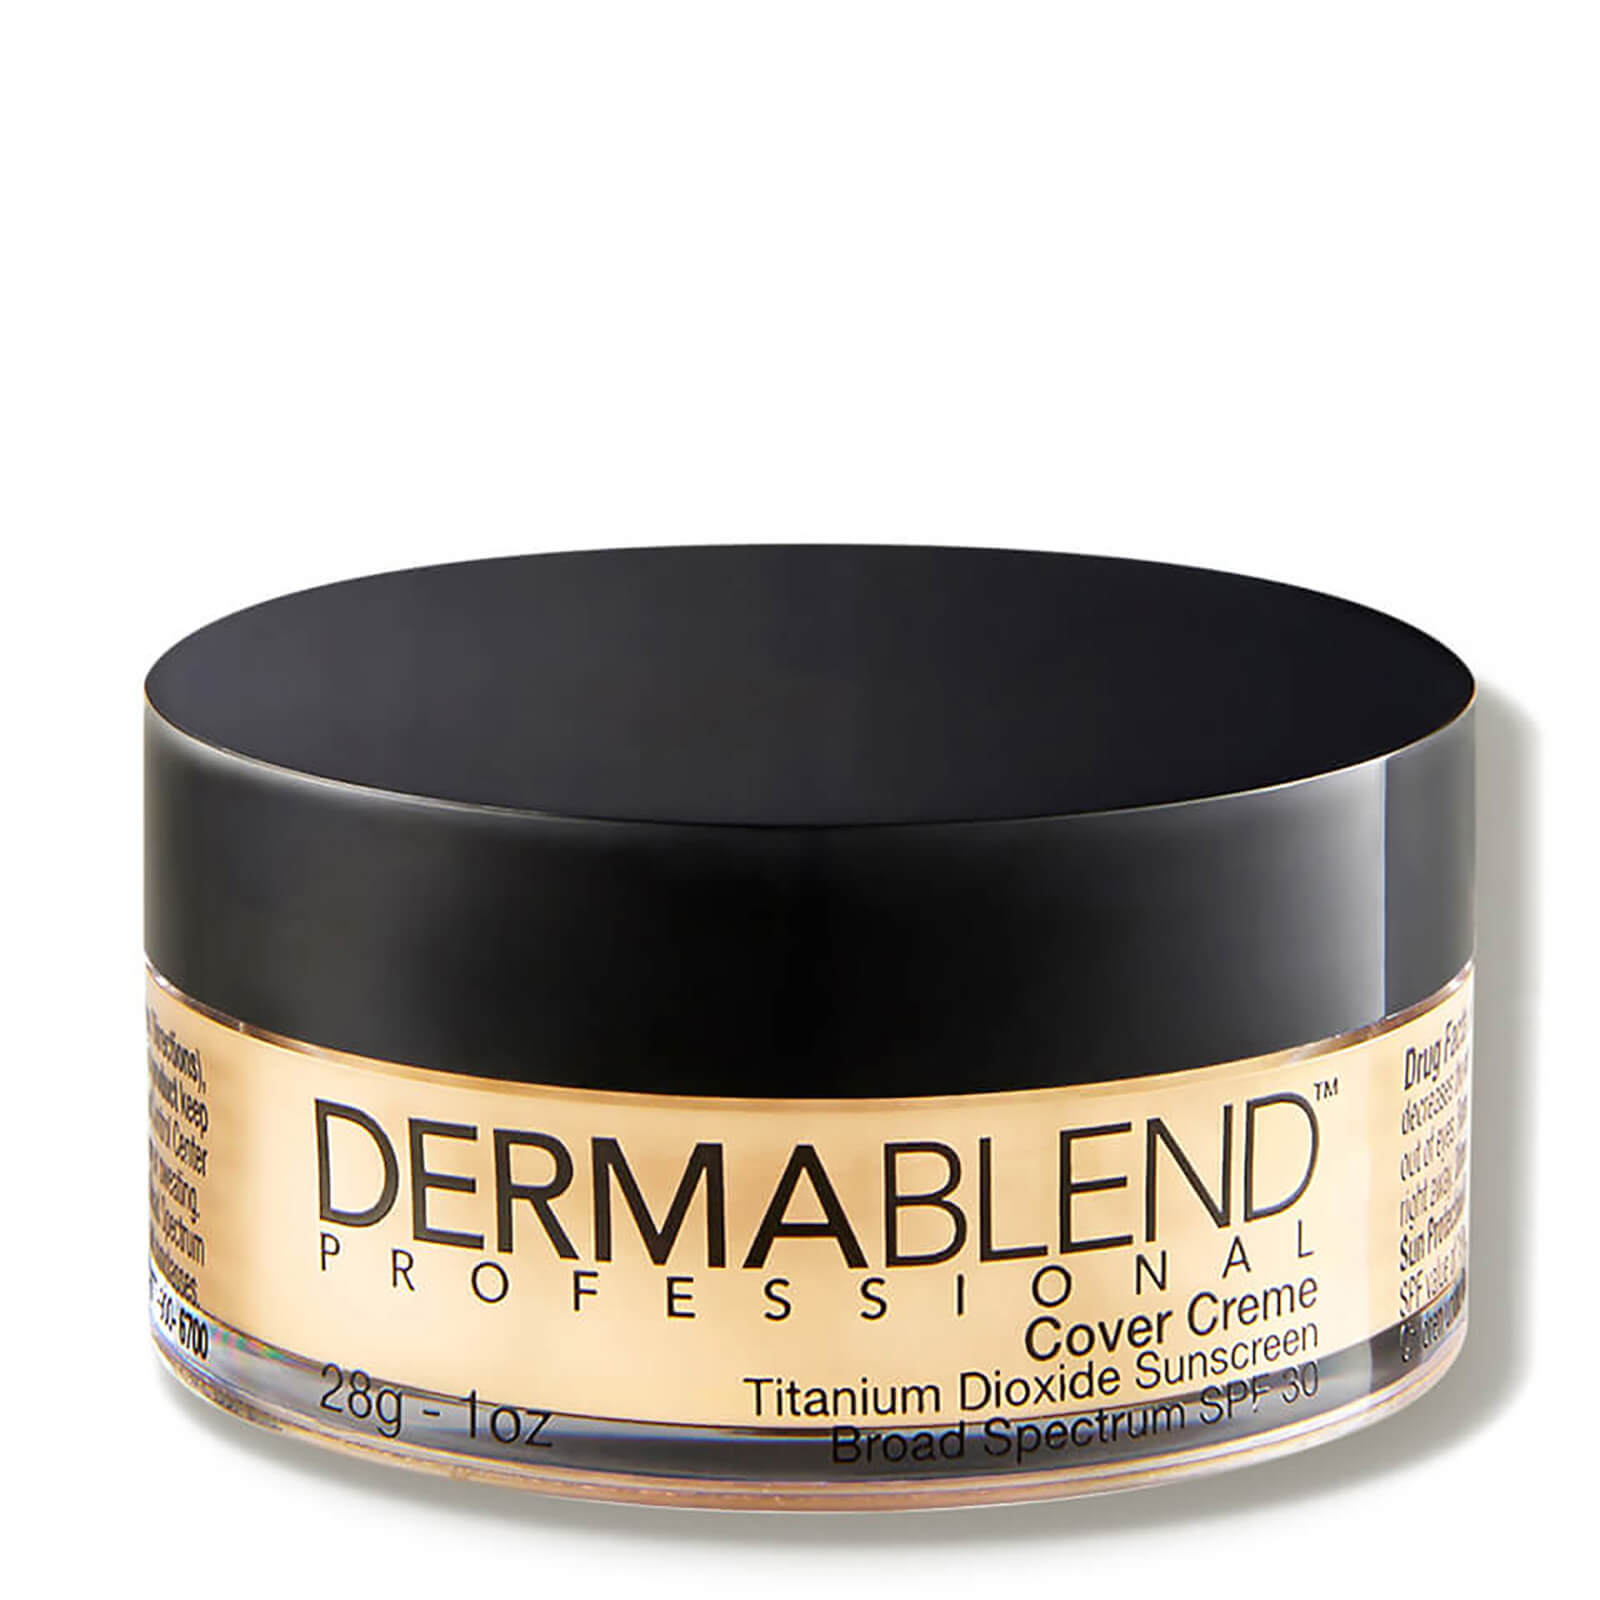 Dermablend Cover Creme Full Coverage Foundation With Spf 30 (1 Oz.) - 10 Neutral In 10 Neutral - Warm Ivory